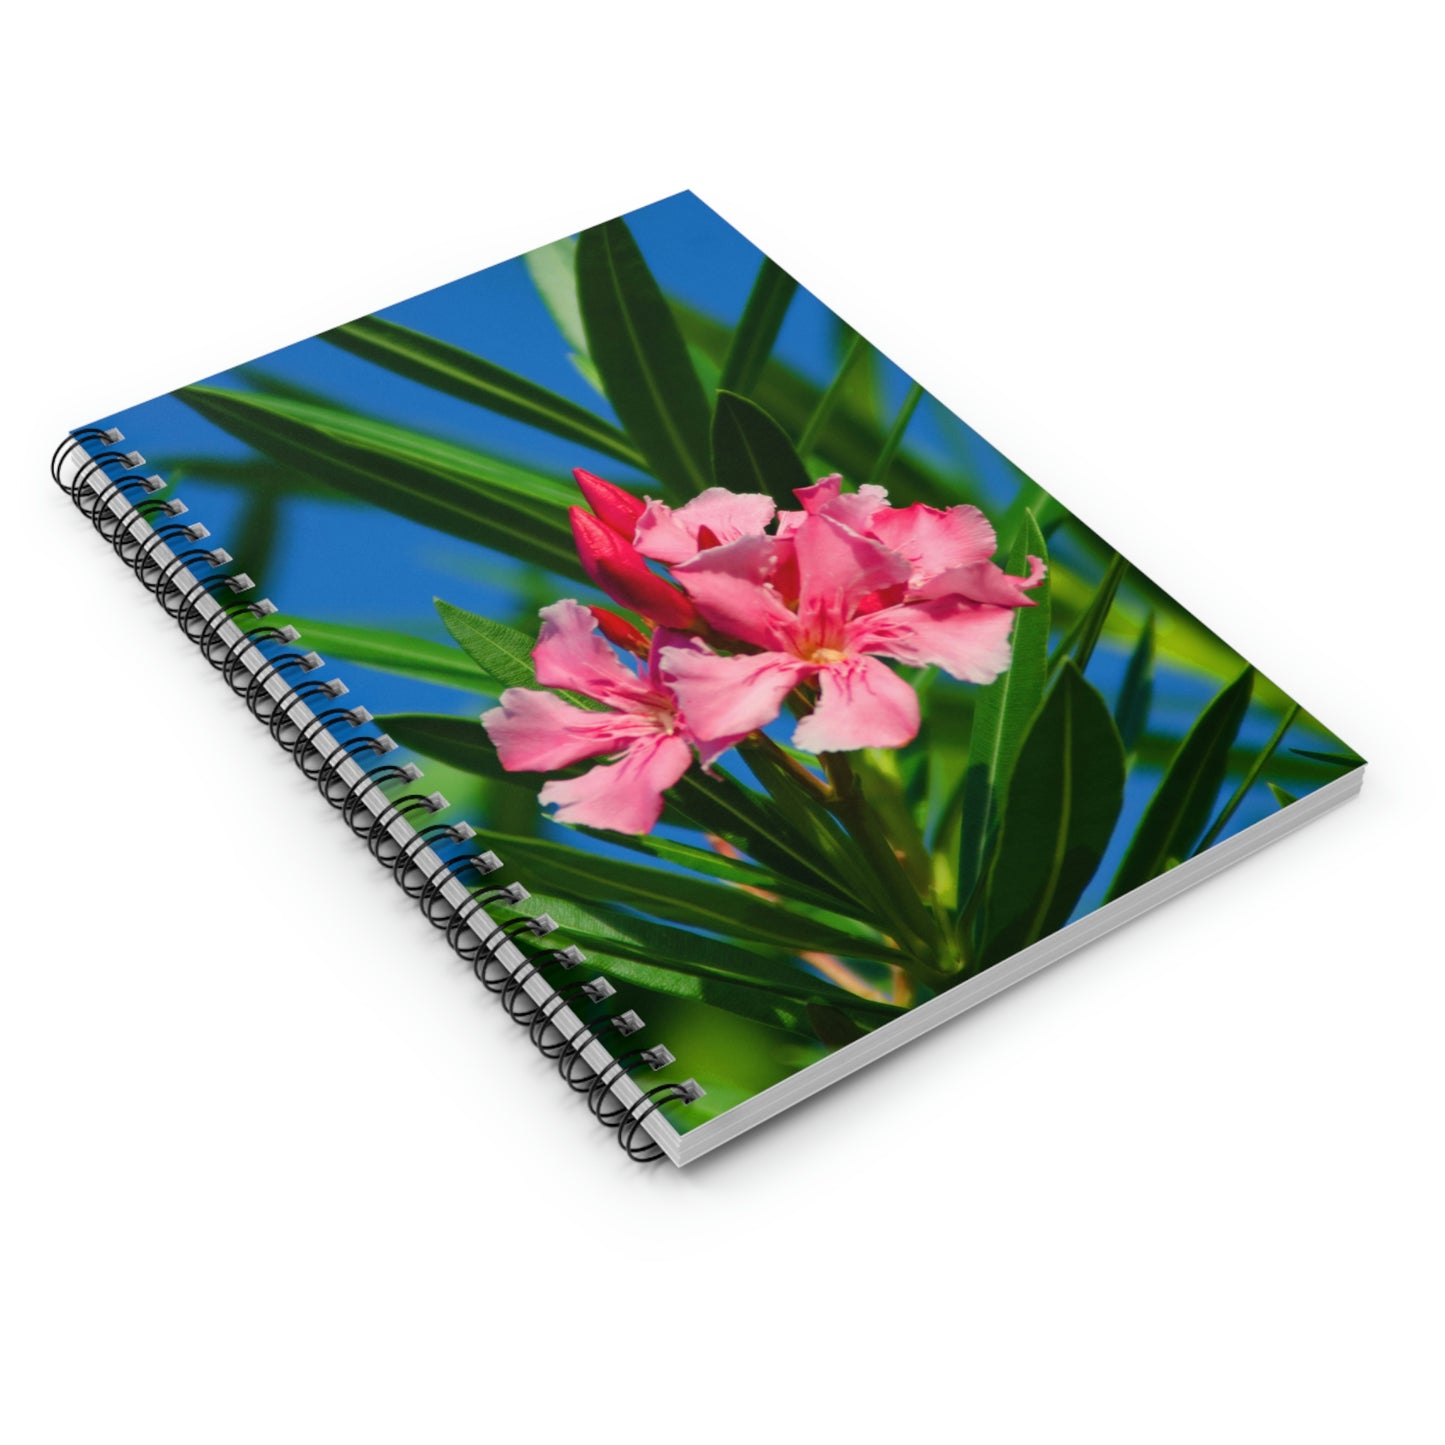 Flowers 30 Spiral Notebook - Ruled Line